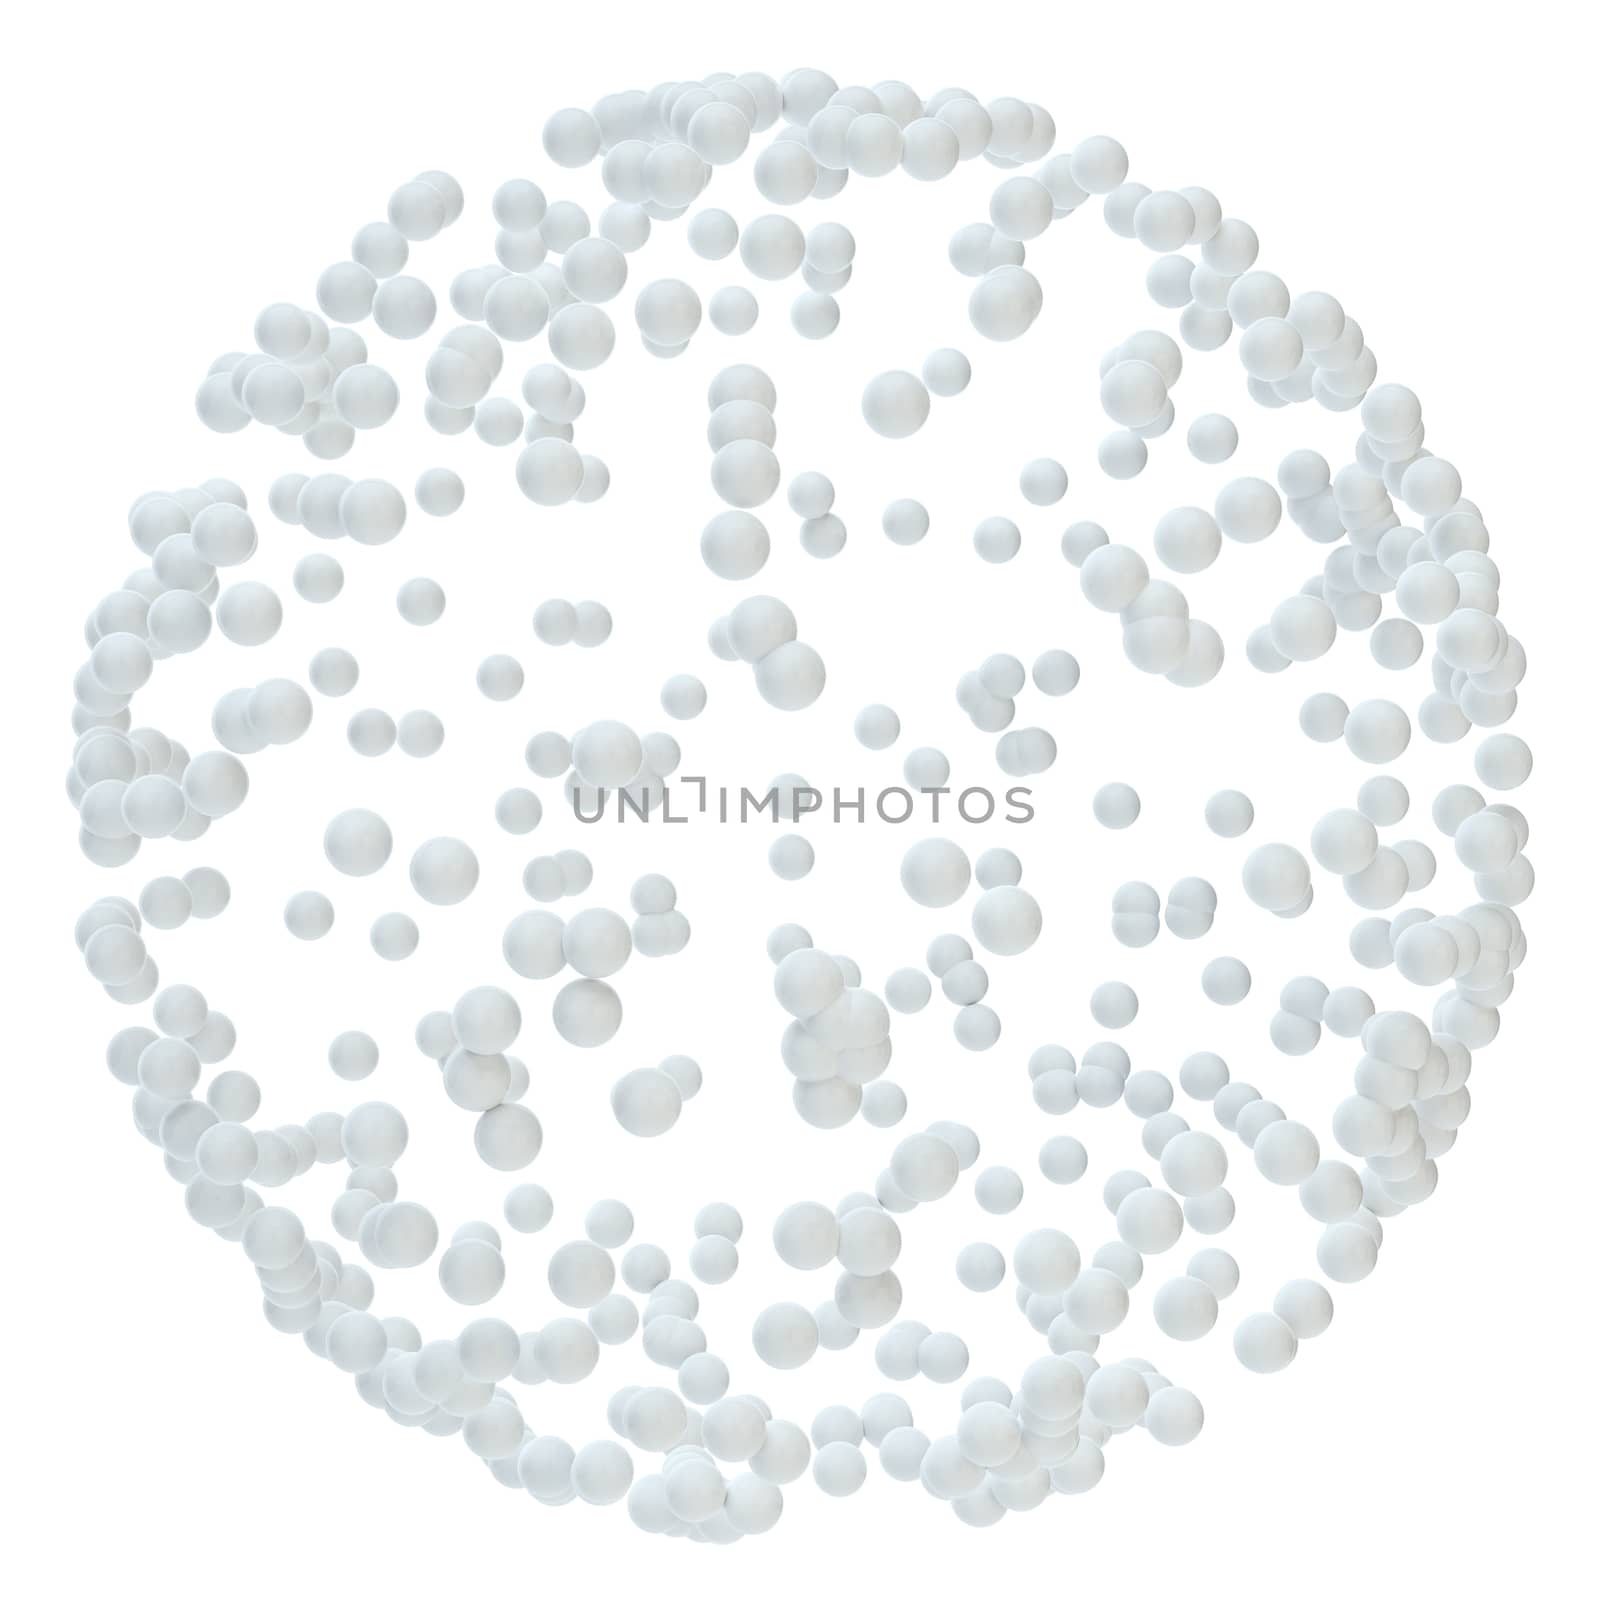 White sphere consisting of small particles by cherezoff